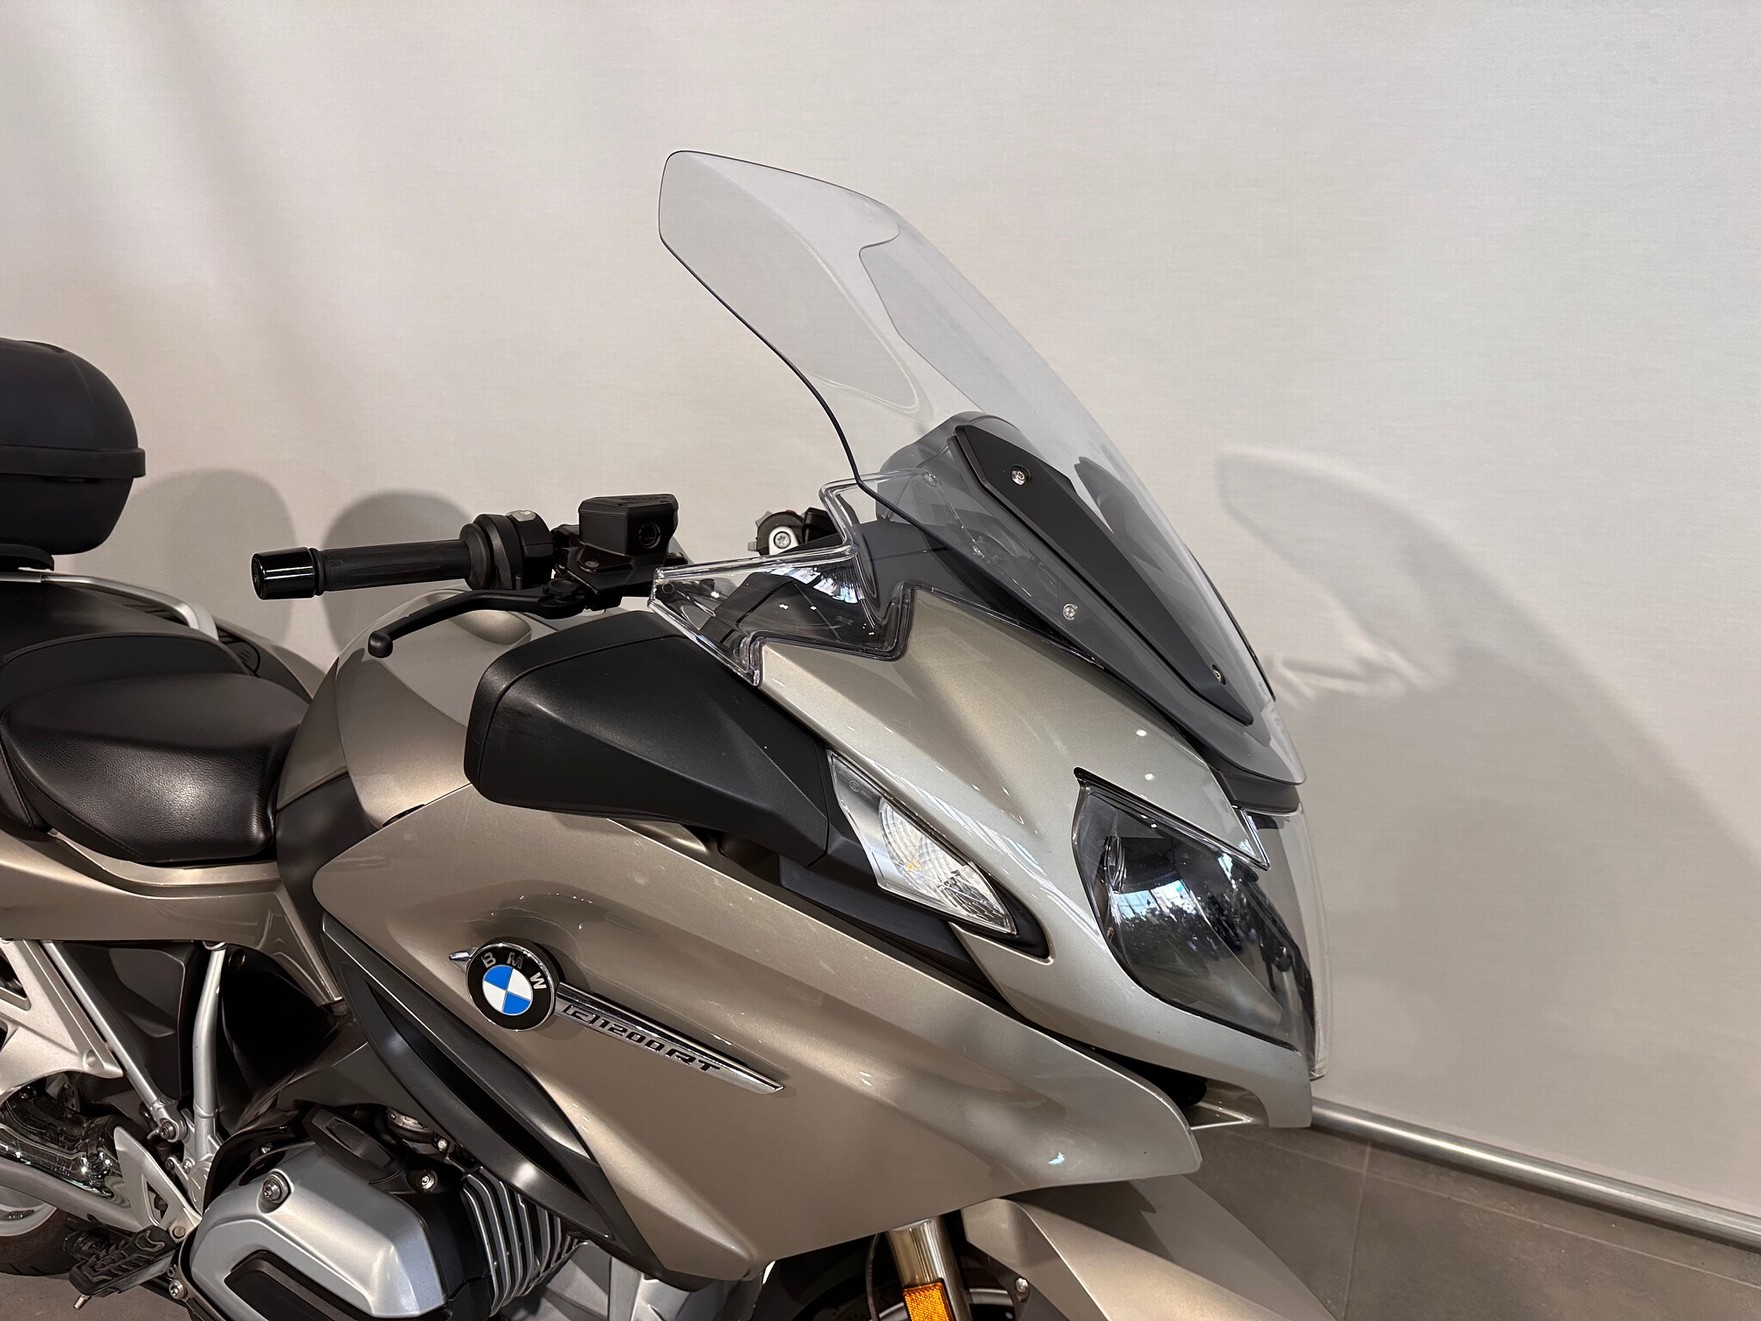 BMW - R 1200 RT ABS